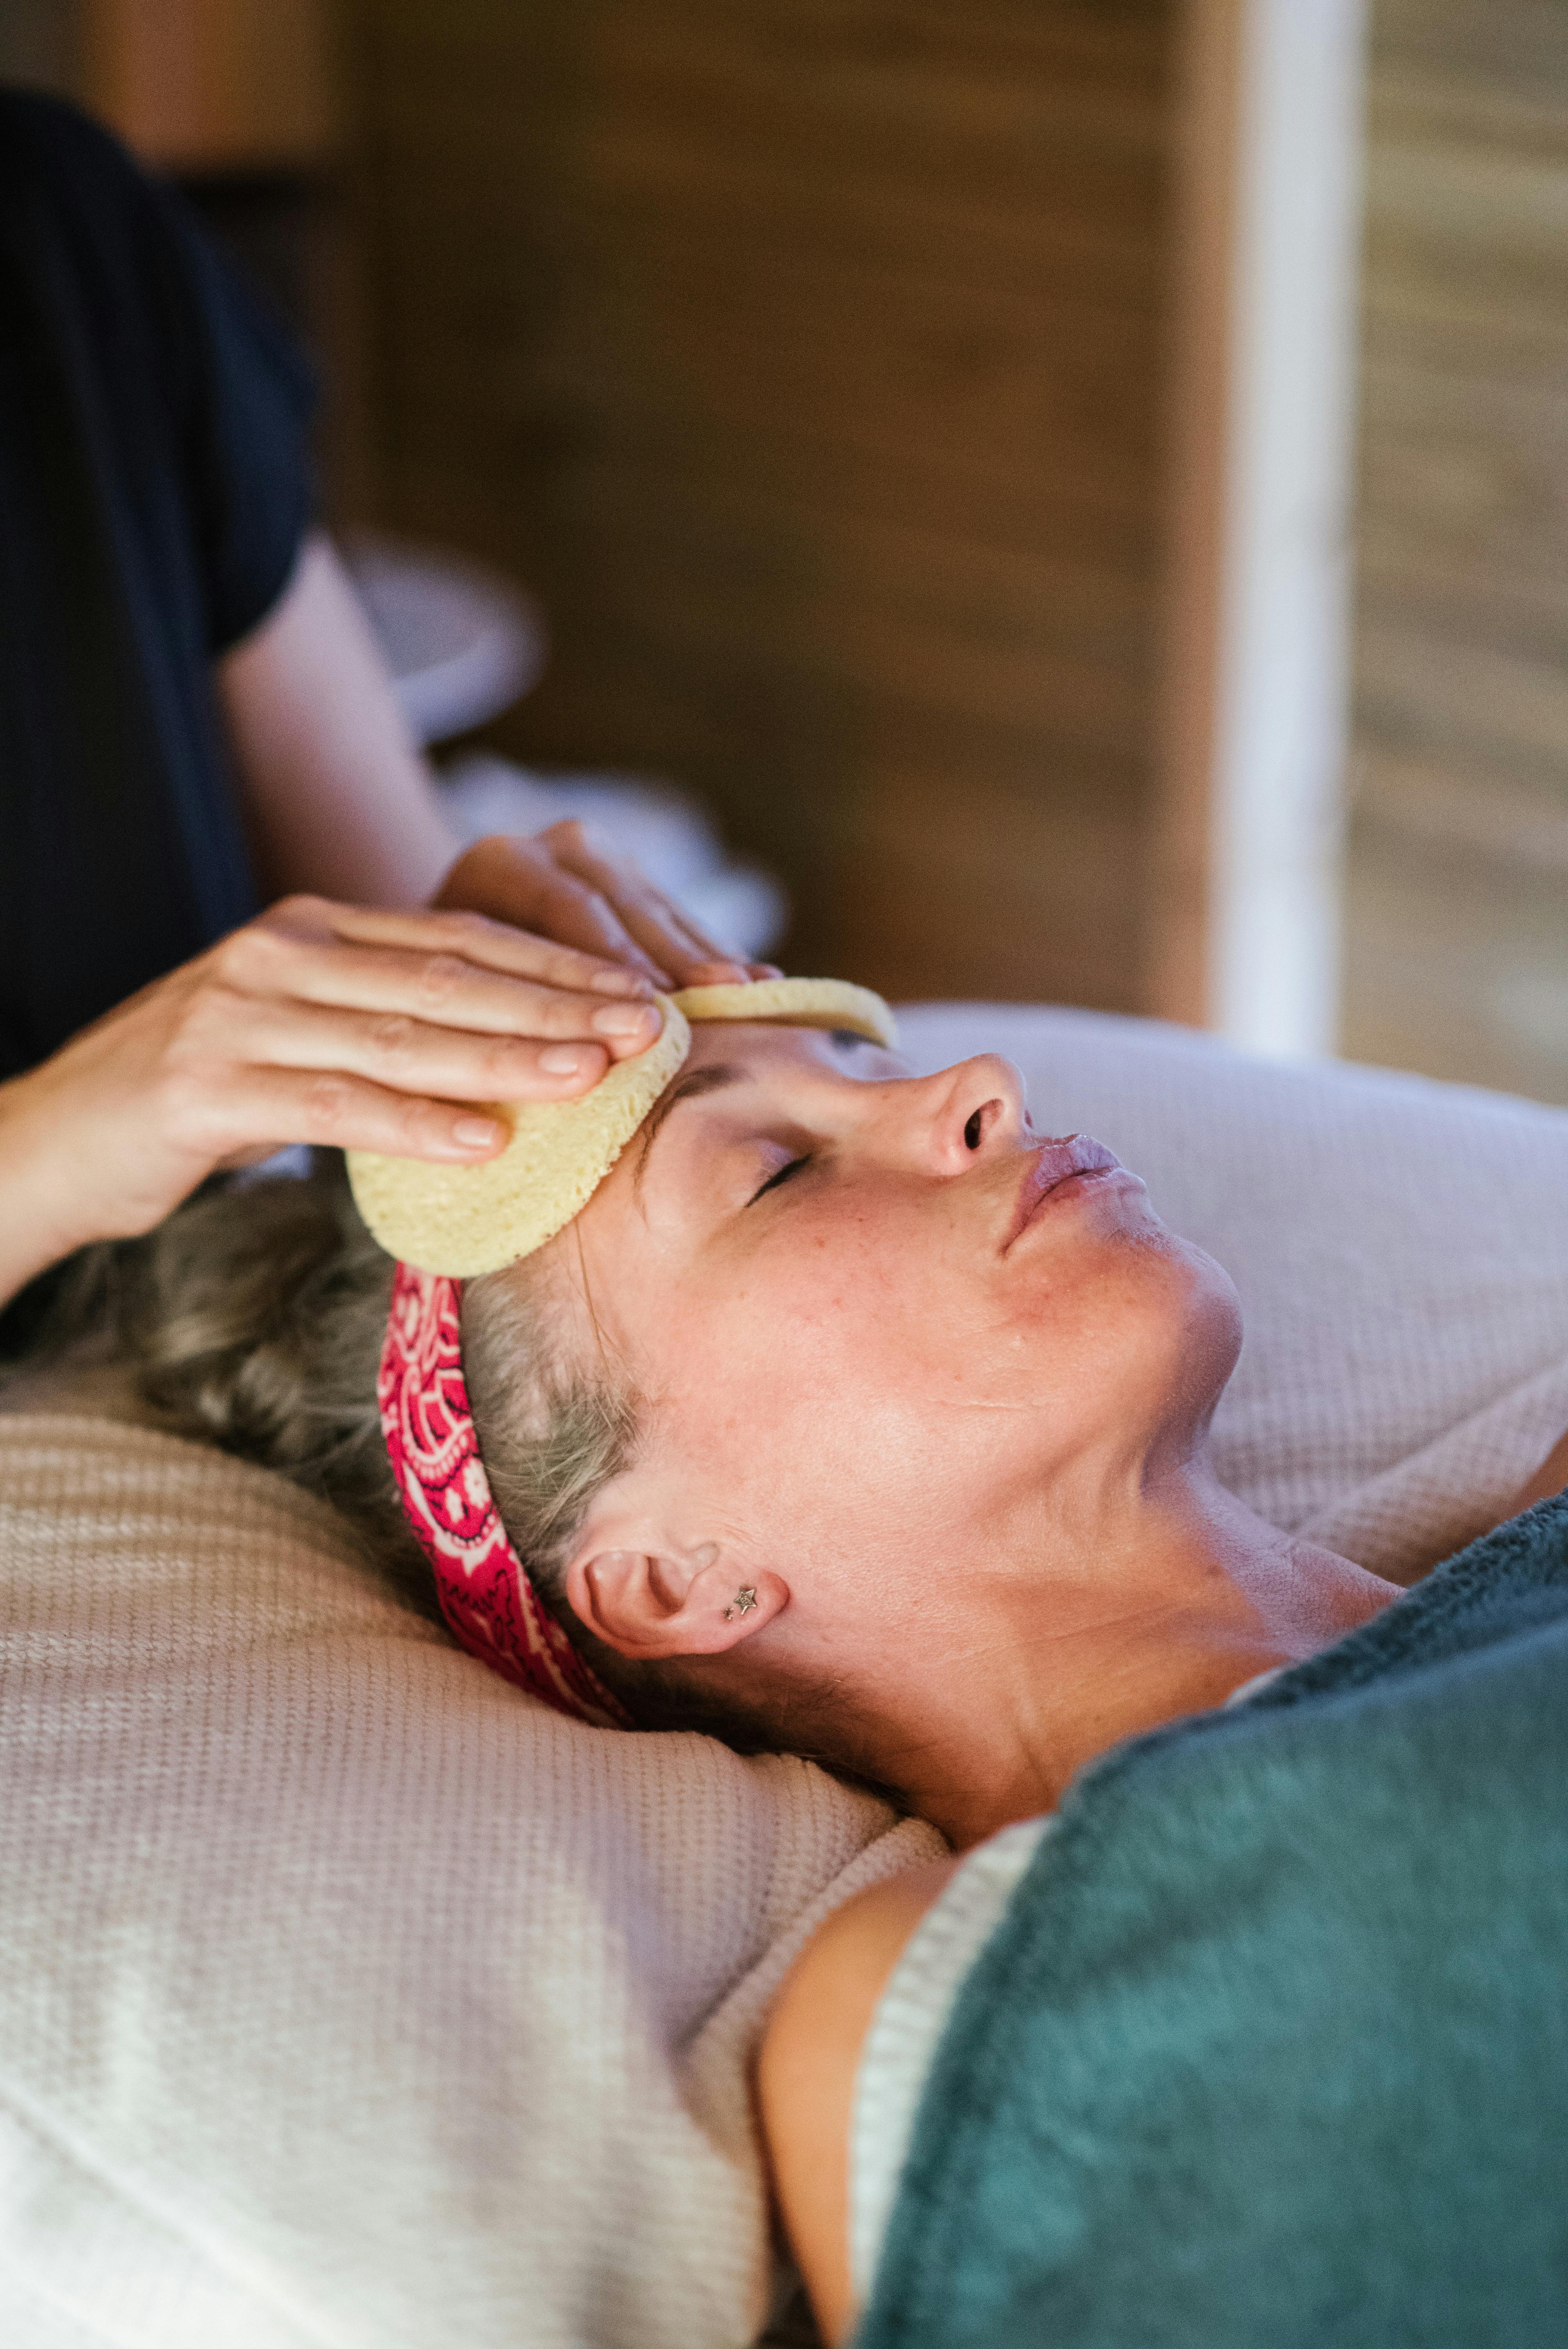 A relaxed woman getting a massage | Source: Pexels